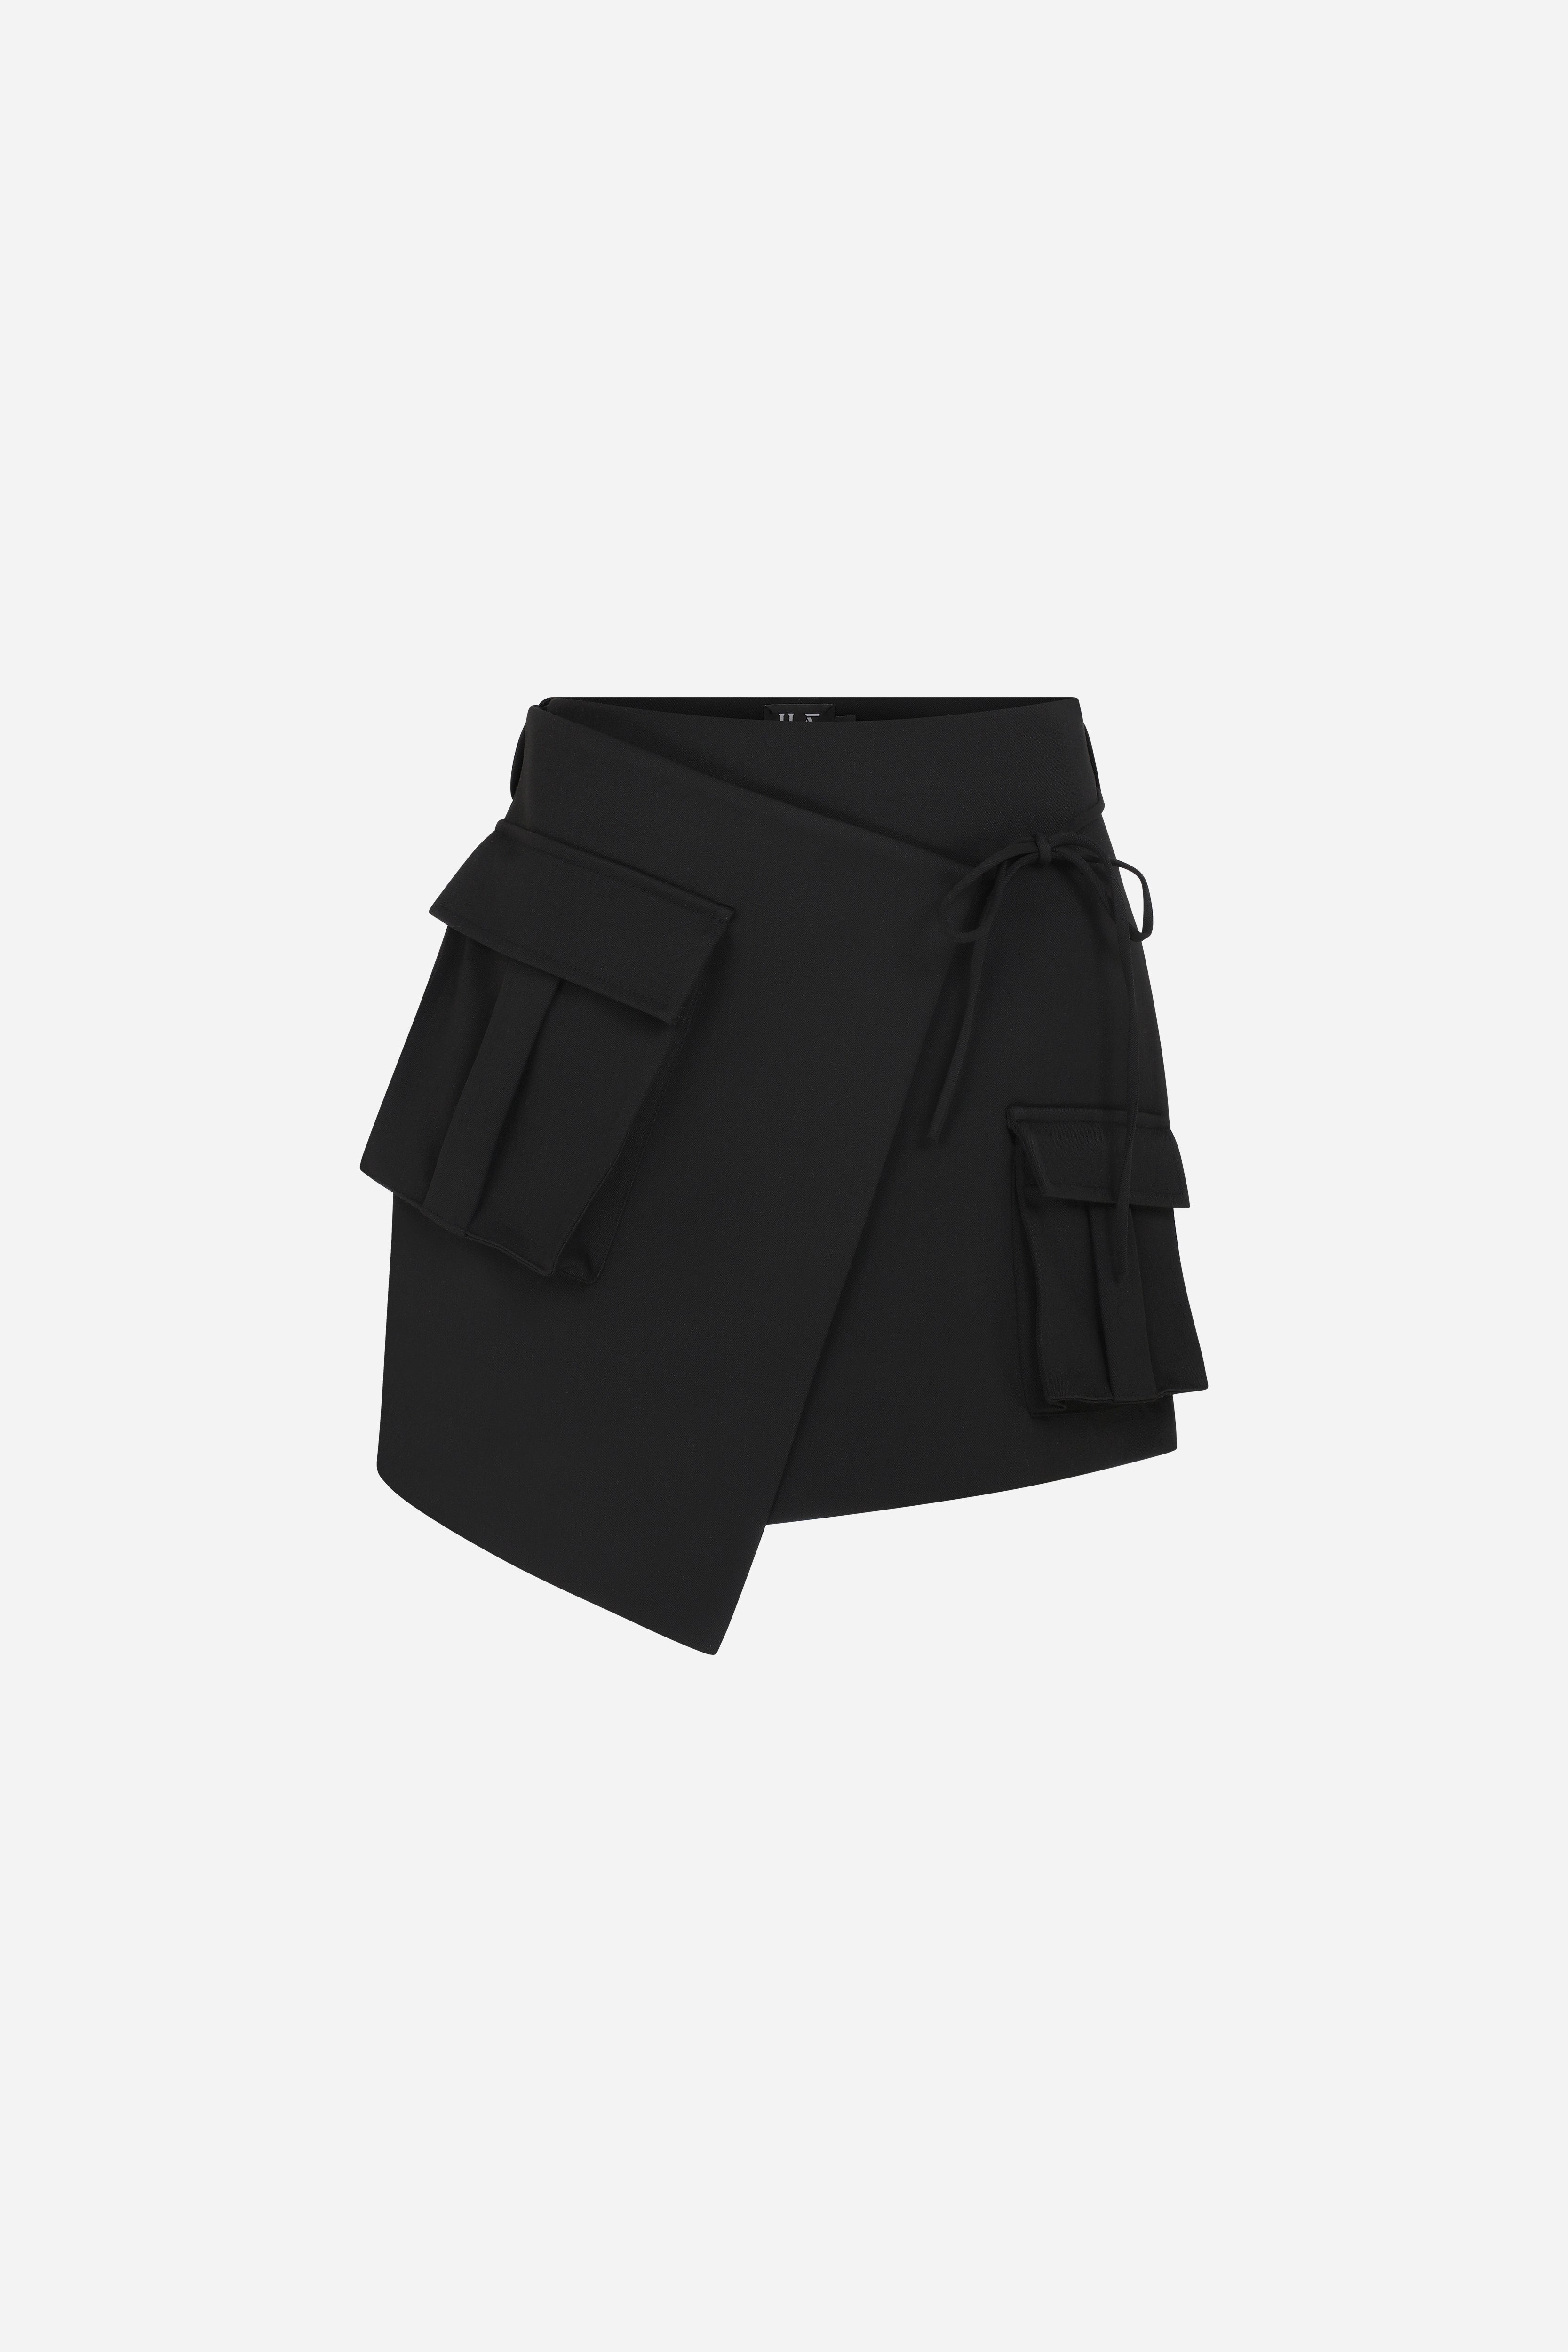 KELLY - WRAPPED MINI SKIRT WITH CARGO POCKETS in Black